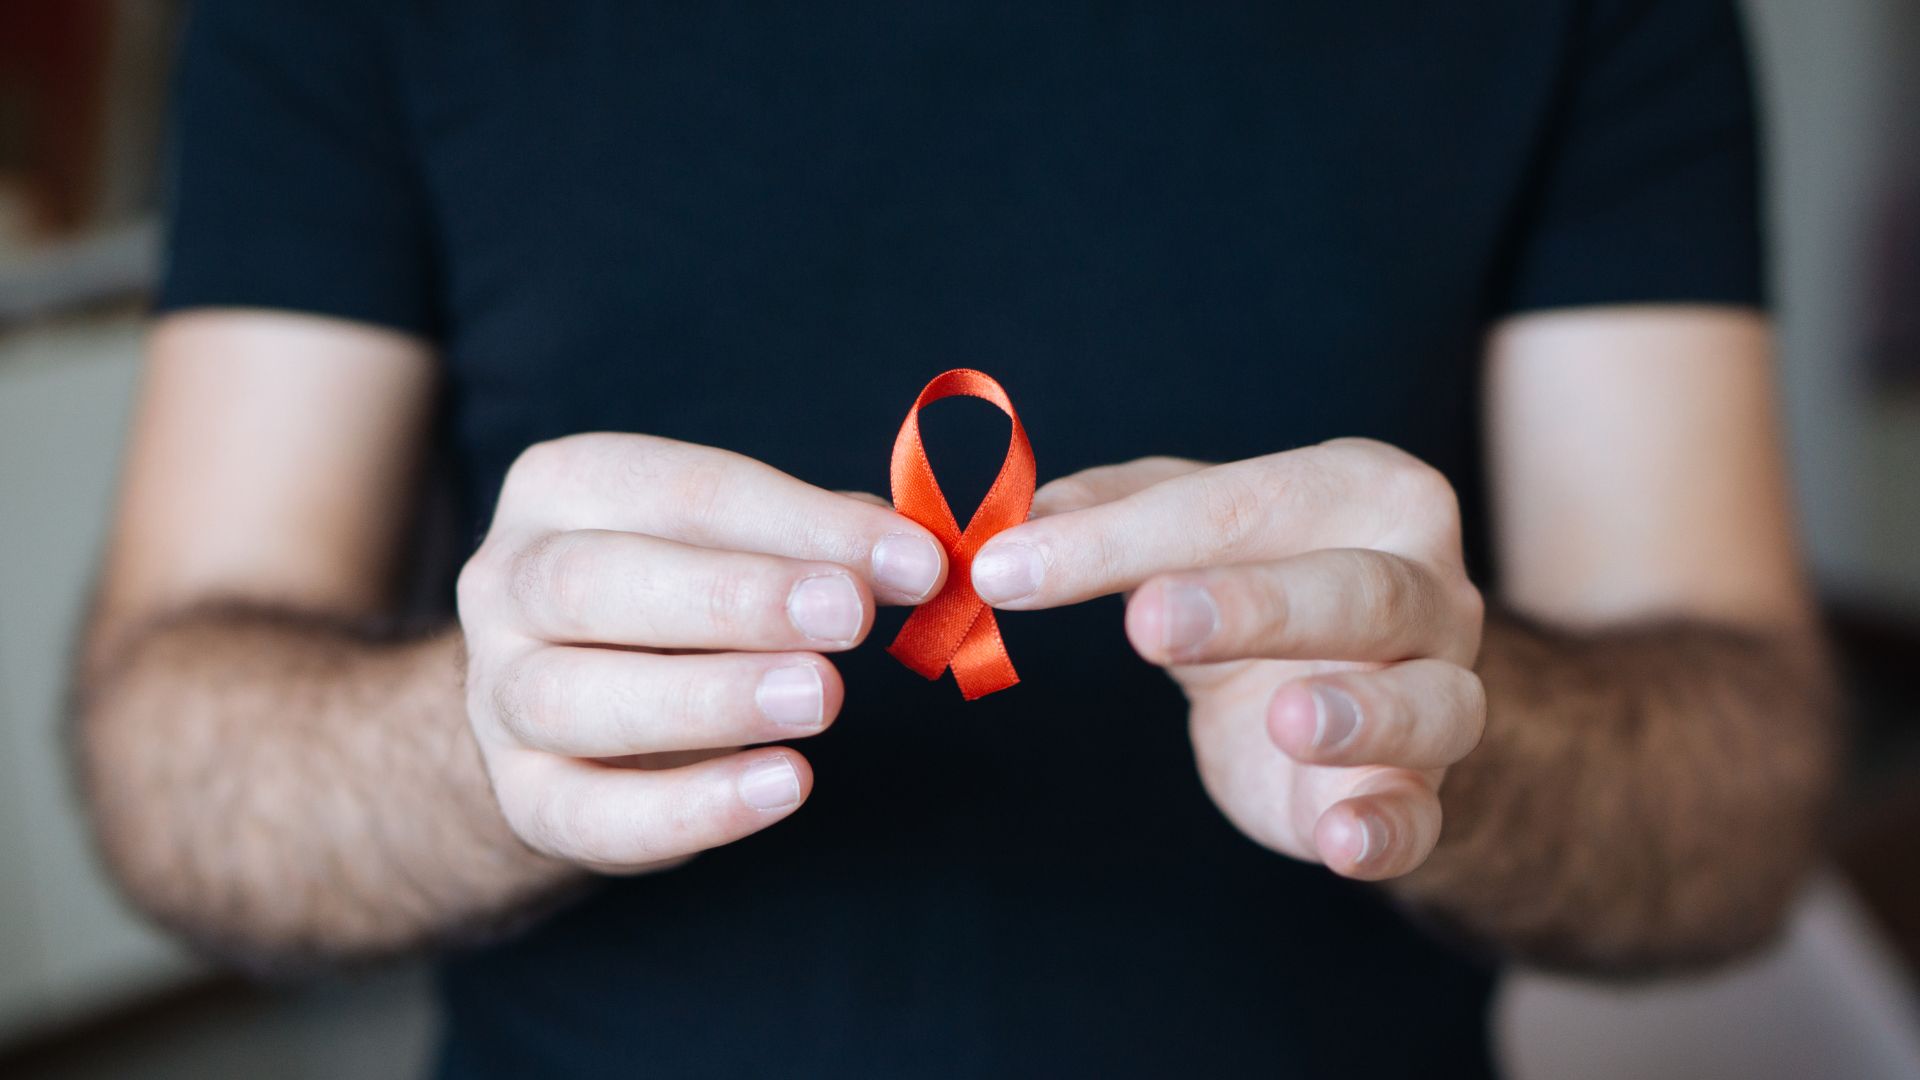 World could end new HIV infections by 2030 if we act now